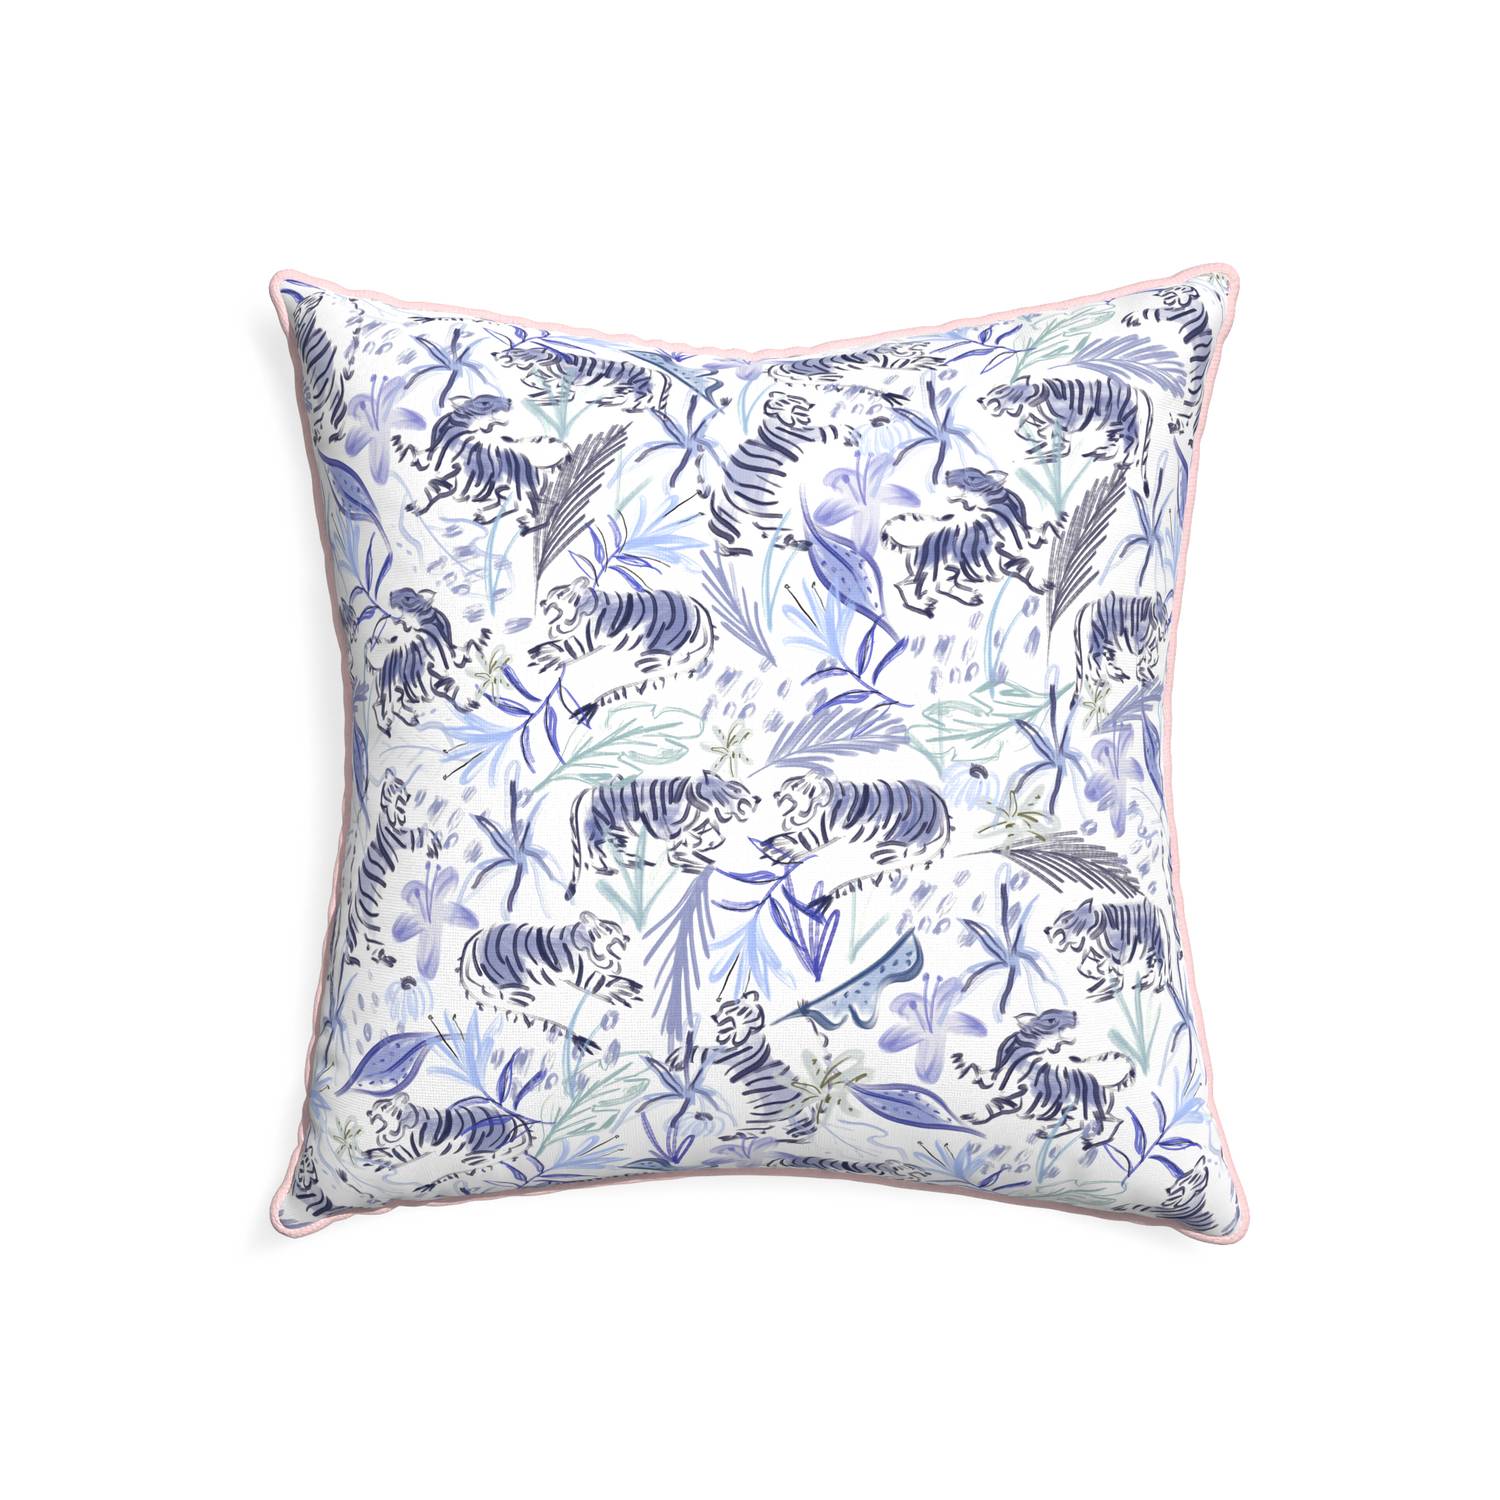 22-square frida blue custom blue with intricate tiger designpillow with petal piping on white background